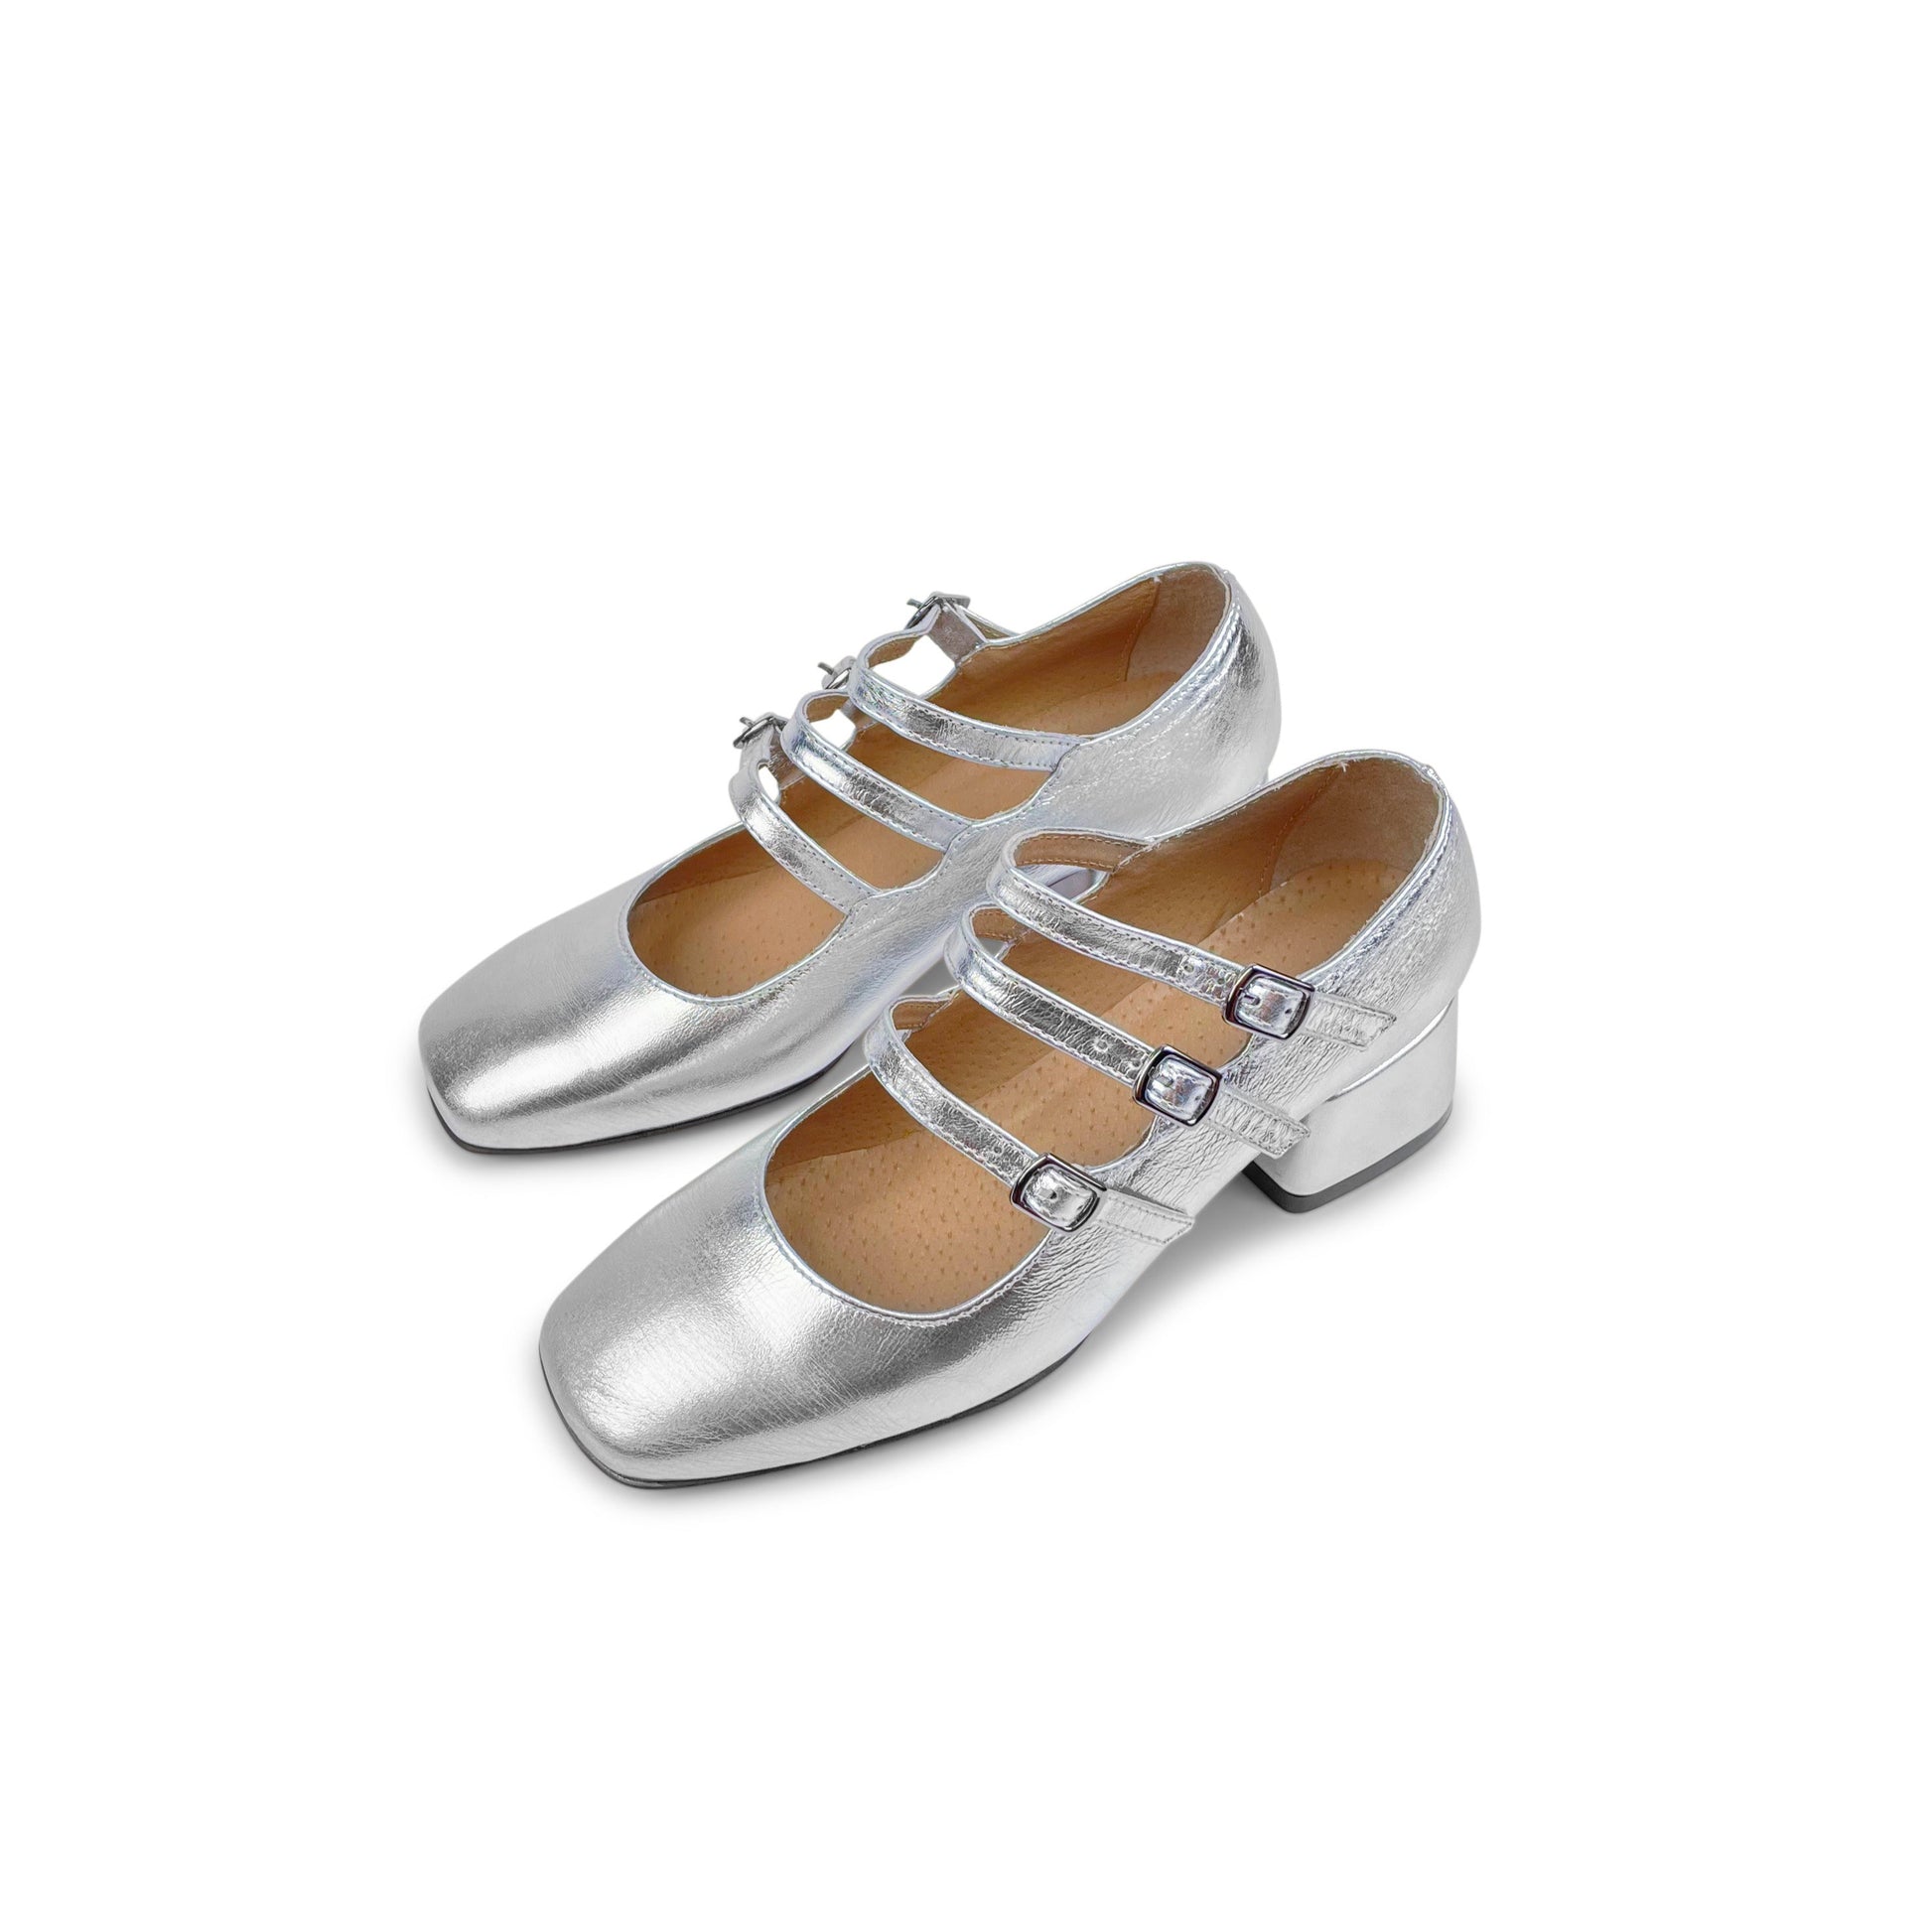 KINA silver leather Mary Janes pumps